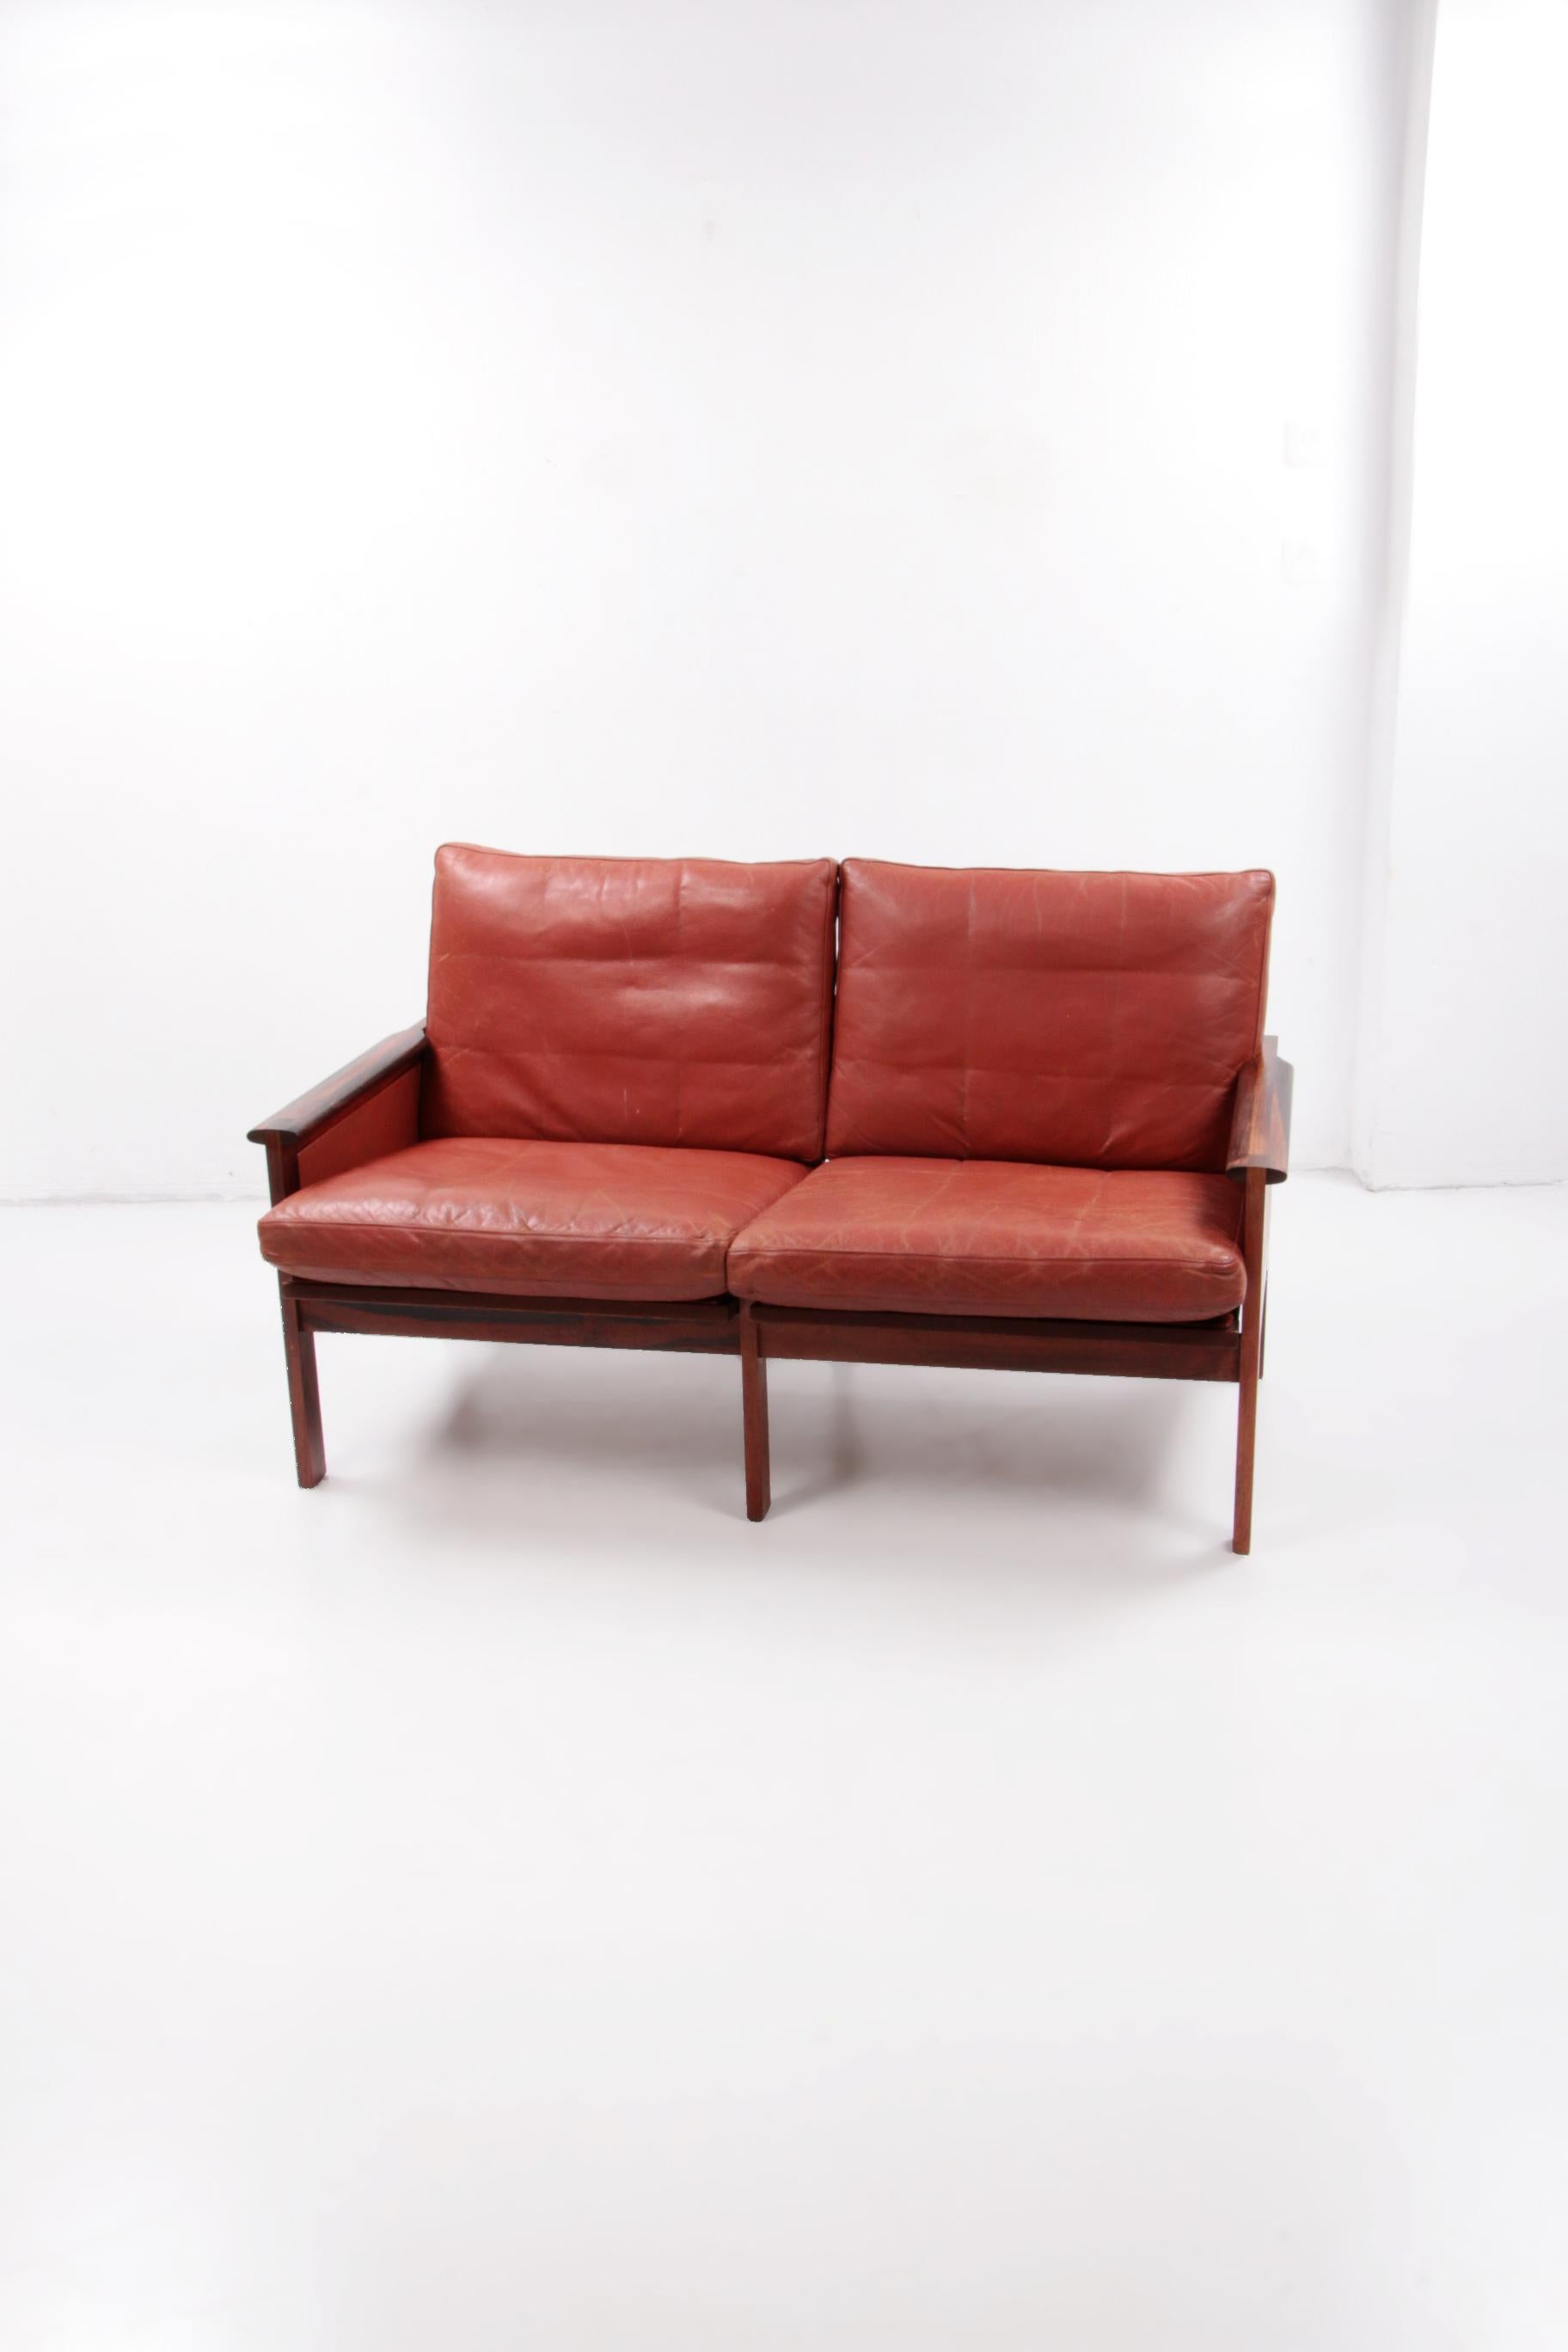 Vintage Design two-seater Model Capella design by Illum Wikkelsø,1960 Denmark.


A beautiful vintage two-seater sofa in solid dark wood and Gognac color leather, designed by Illum Wikkelso in 1958 and made by Niels Eilersen. The condition of the